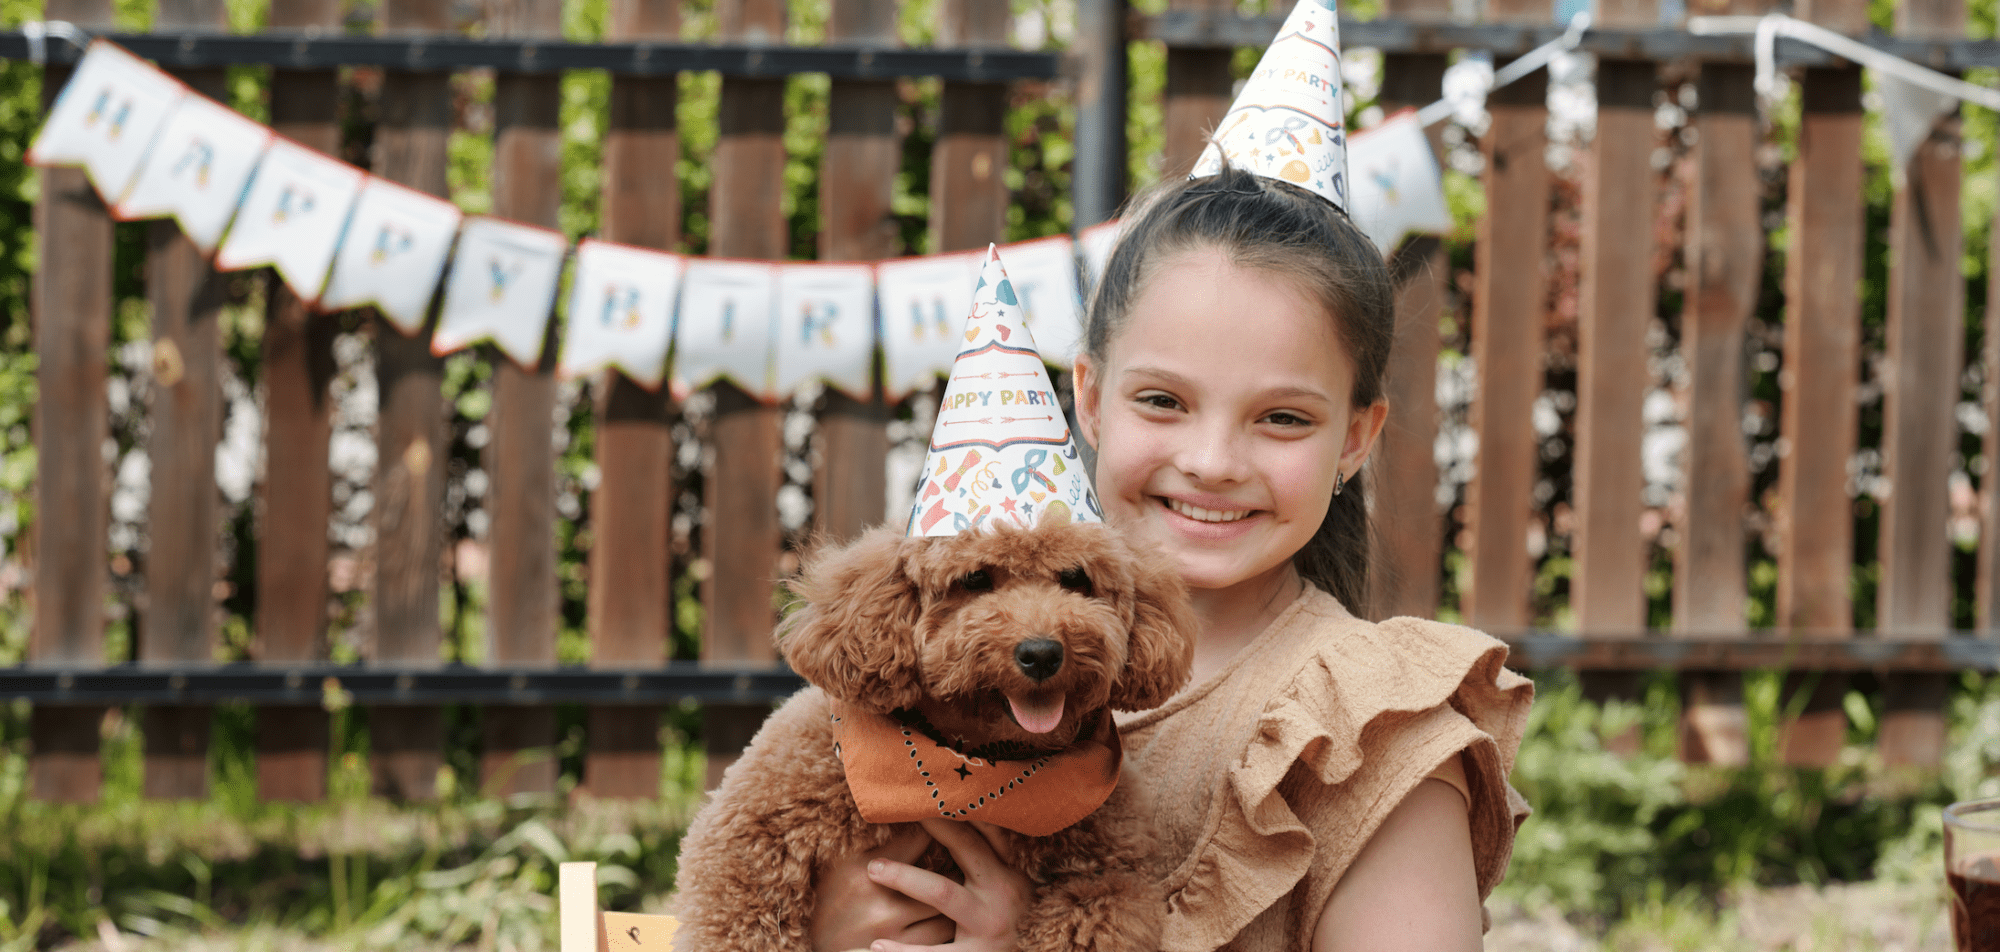 dog cat pet party theme hat costume decor ideas trends how to plan 